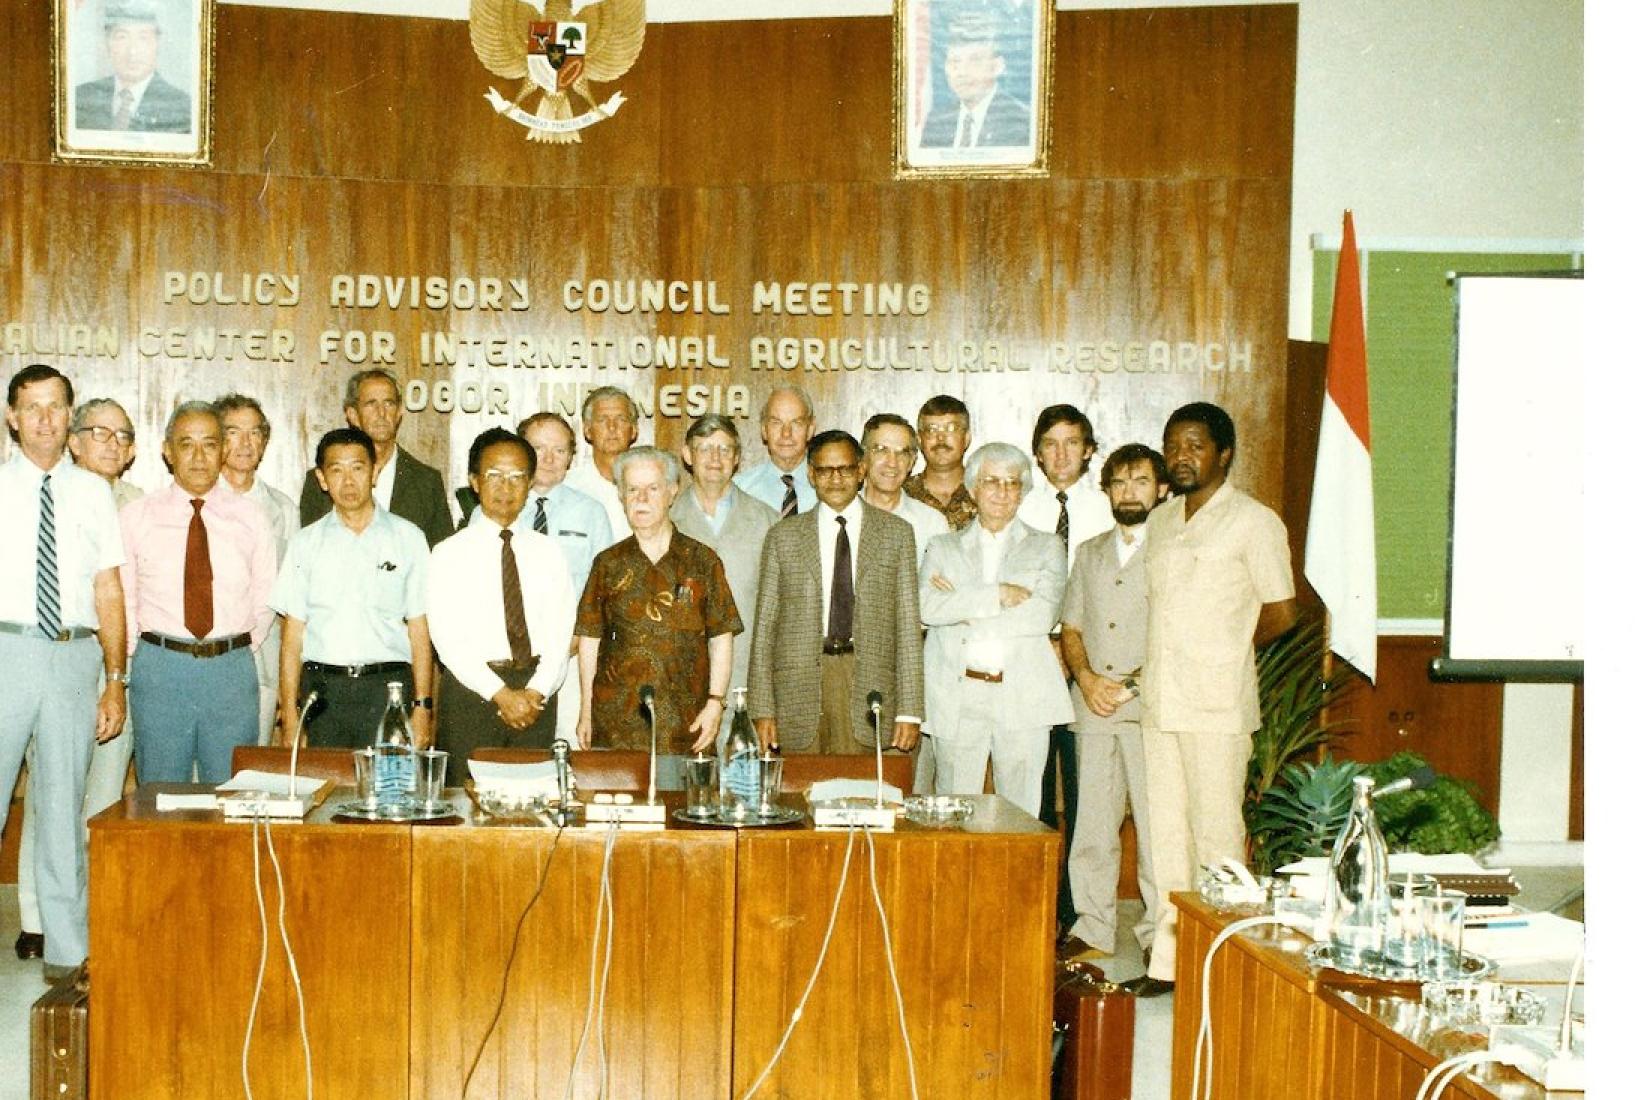 The ACIAR Policy Advisory Council (PAC) meeting in Bogor and Ciawim in 1984, provided an opportunity to review research on shrub legumes in Indonesia and Australia and to explore potential areas for collaborative work supported by ACIAR.